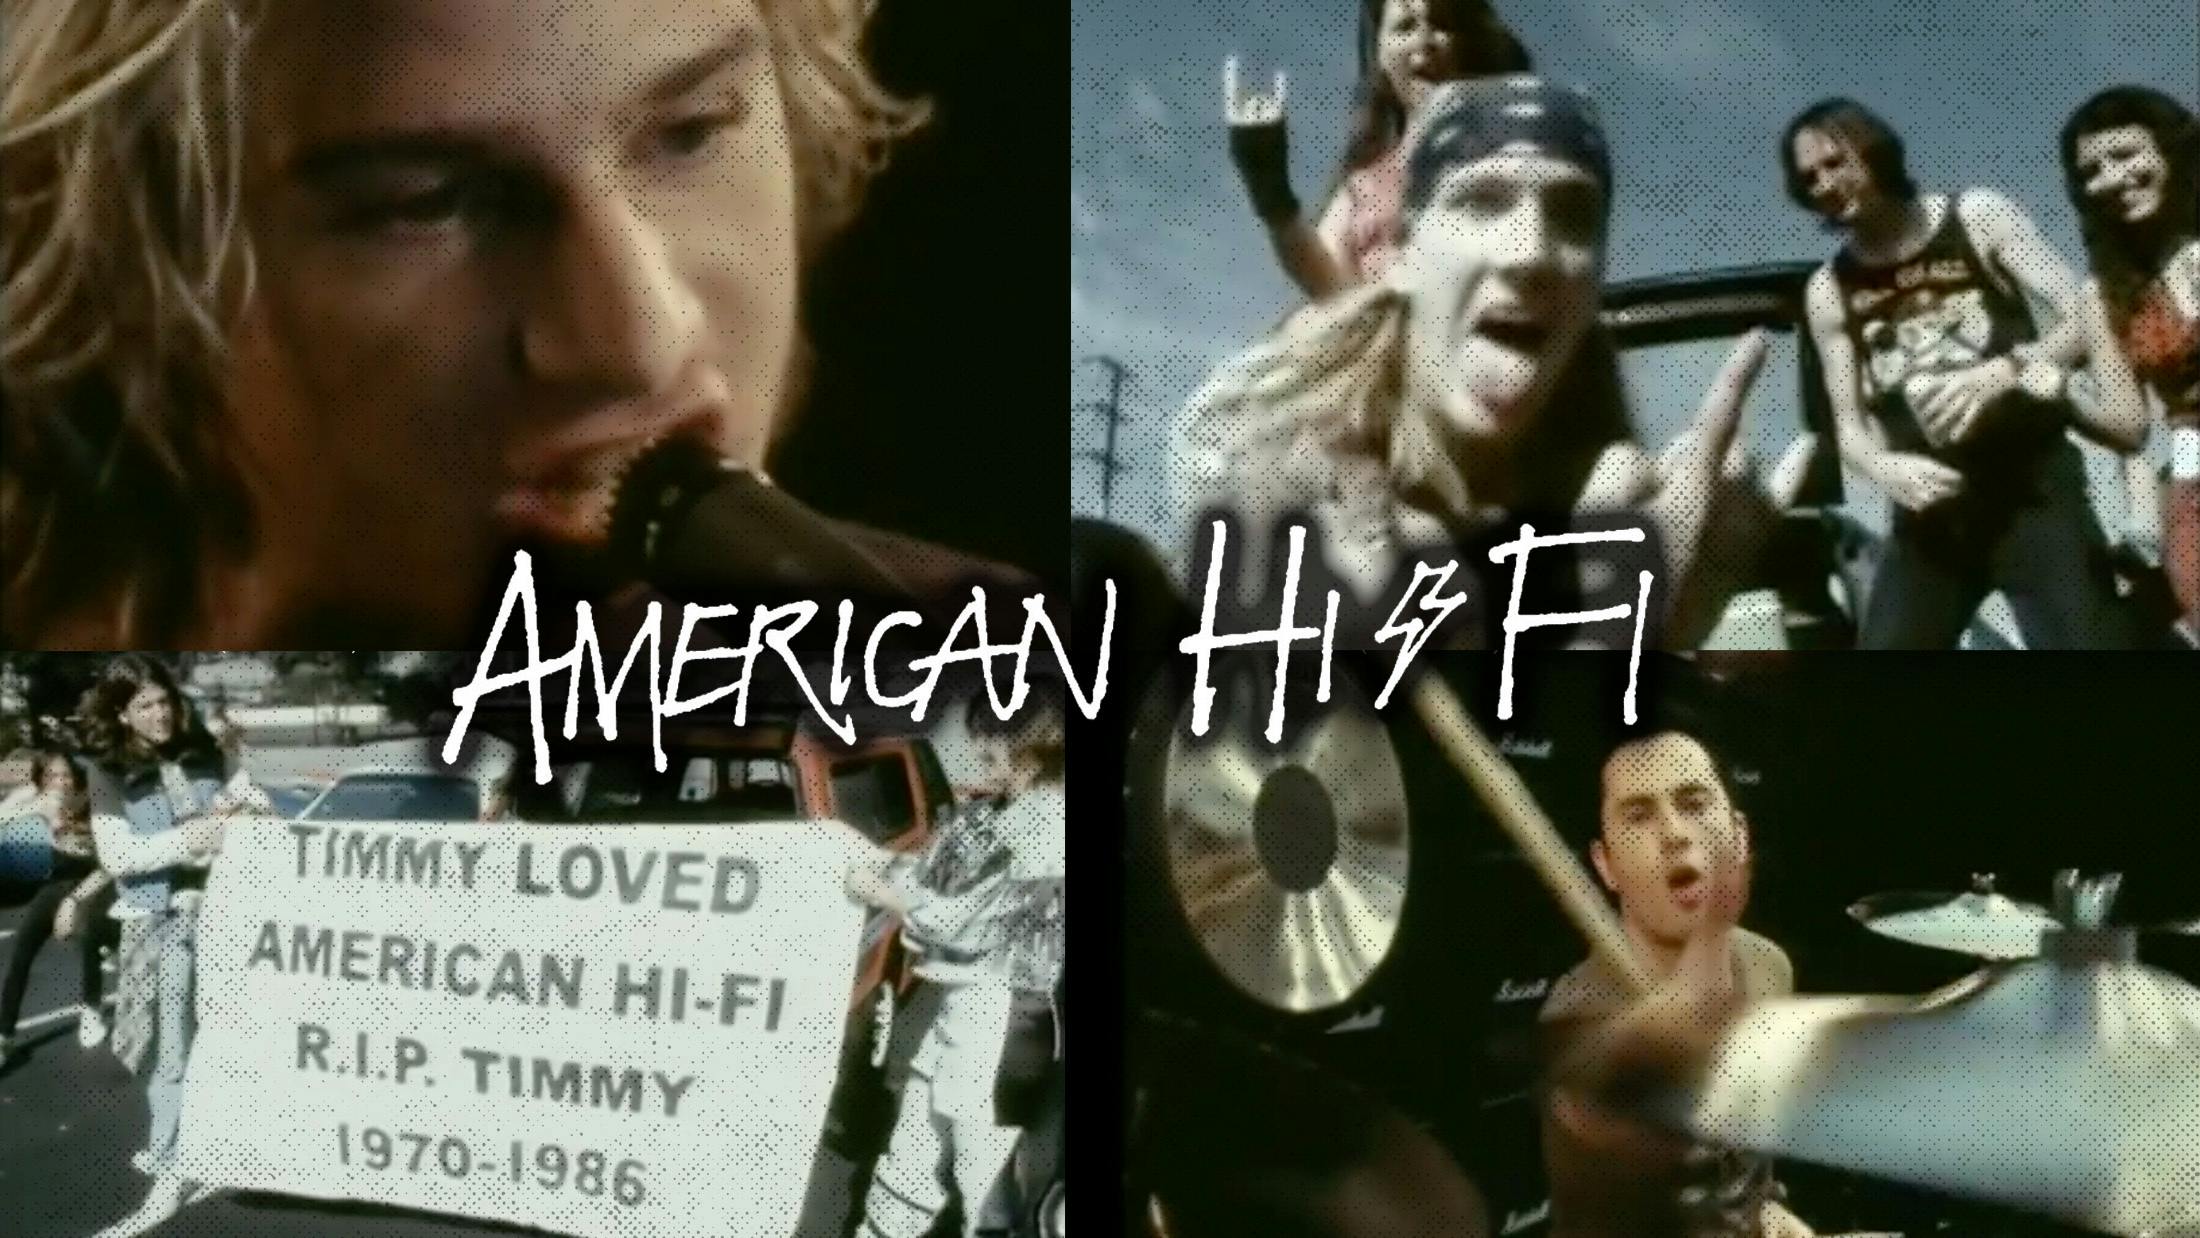 A Deep Dive Into American Hi-Fi’s Video For Flavor Of The Weak